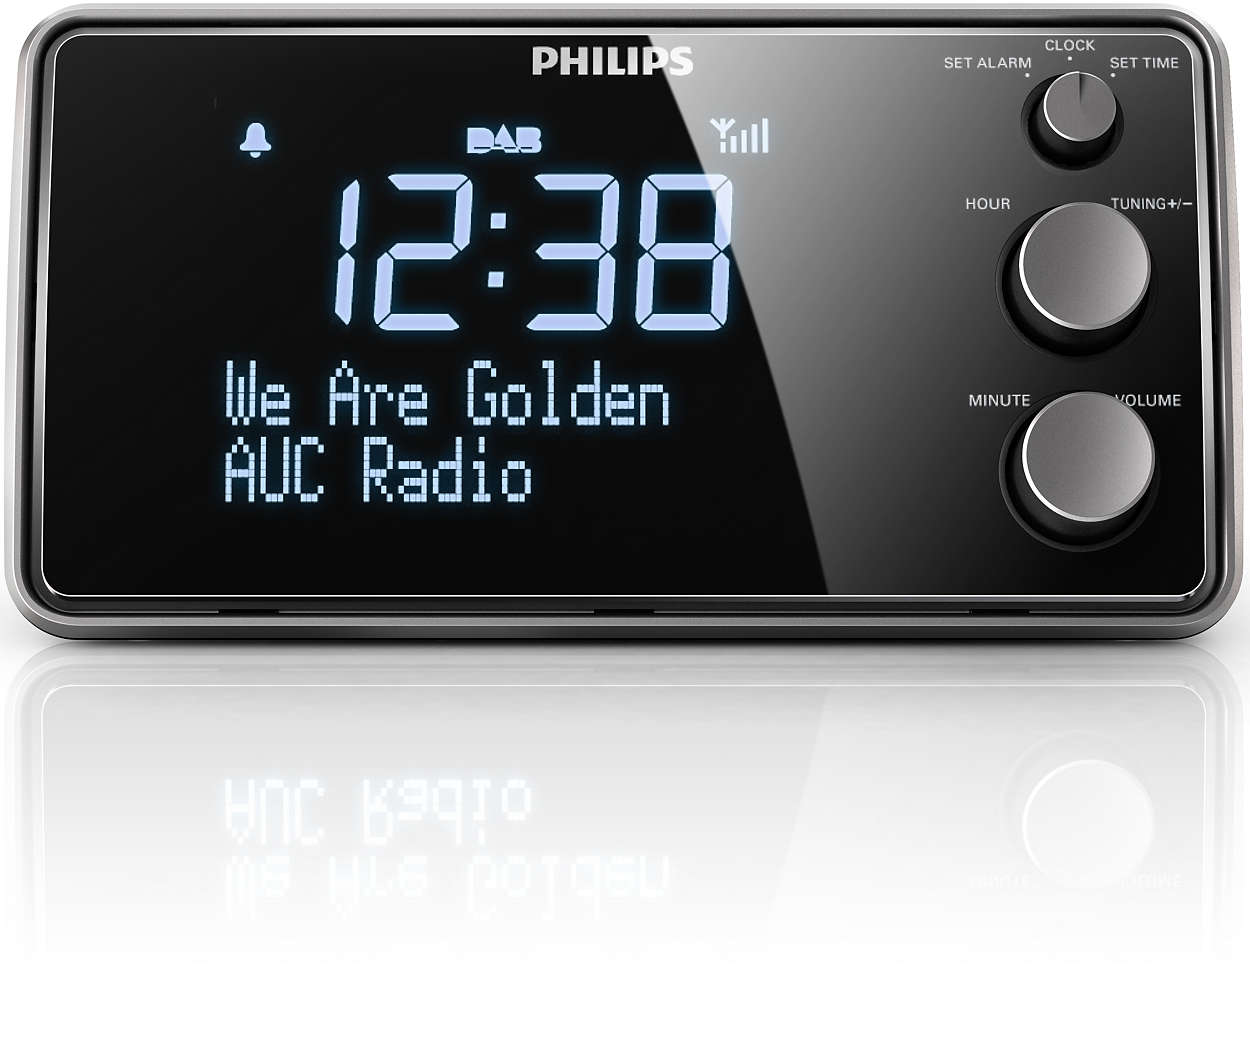 Wake up to clear and crackle-free DAB radio